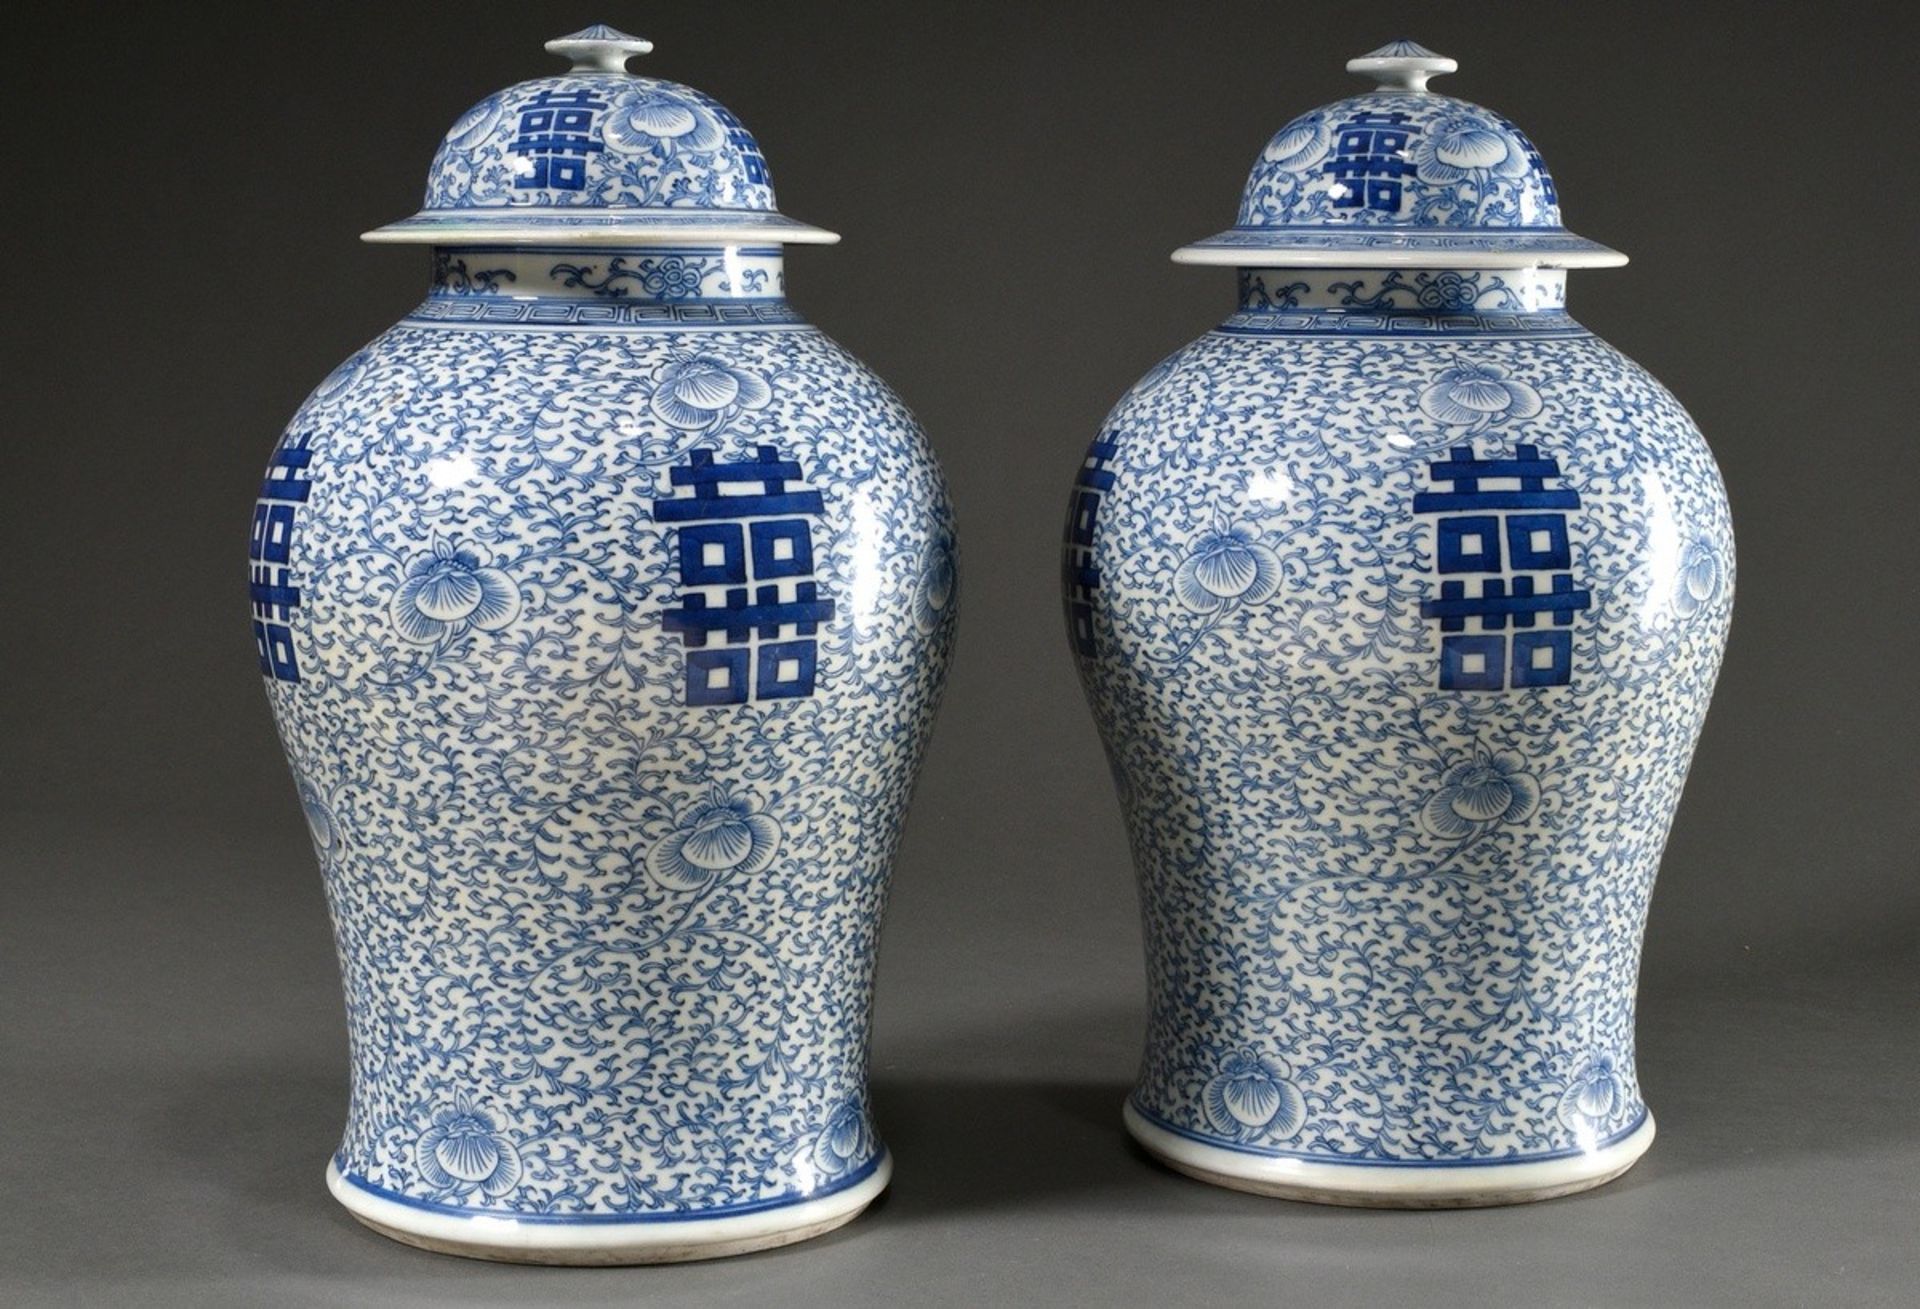 Pair of large Chinese porcelain lidded vases in baluster form with floral blue-and-white painting a